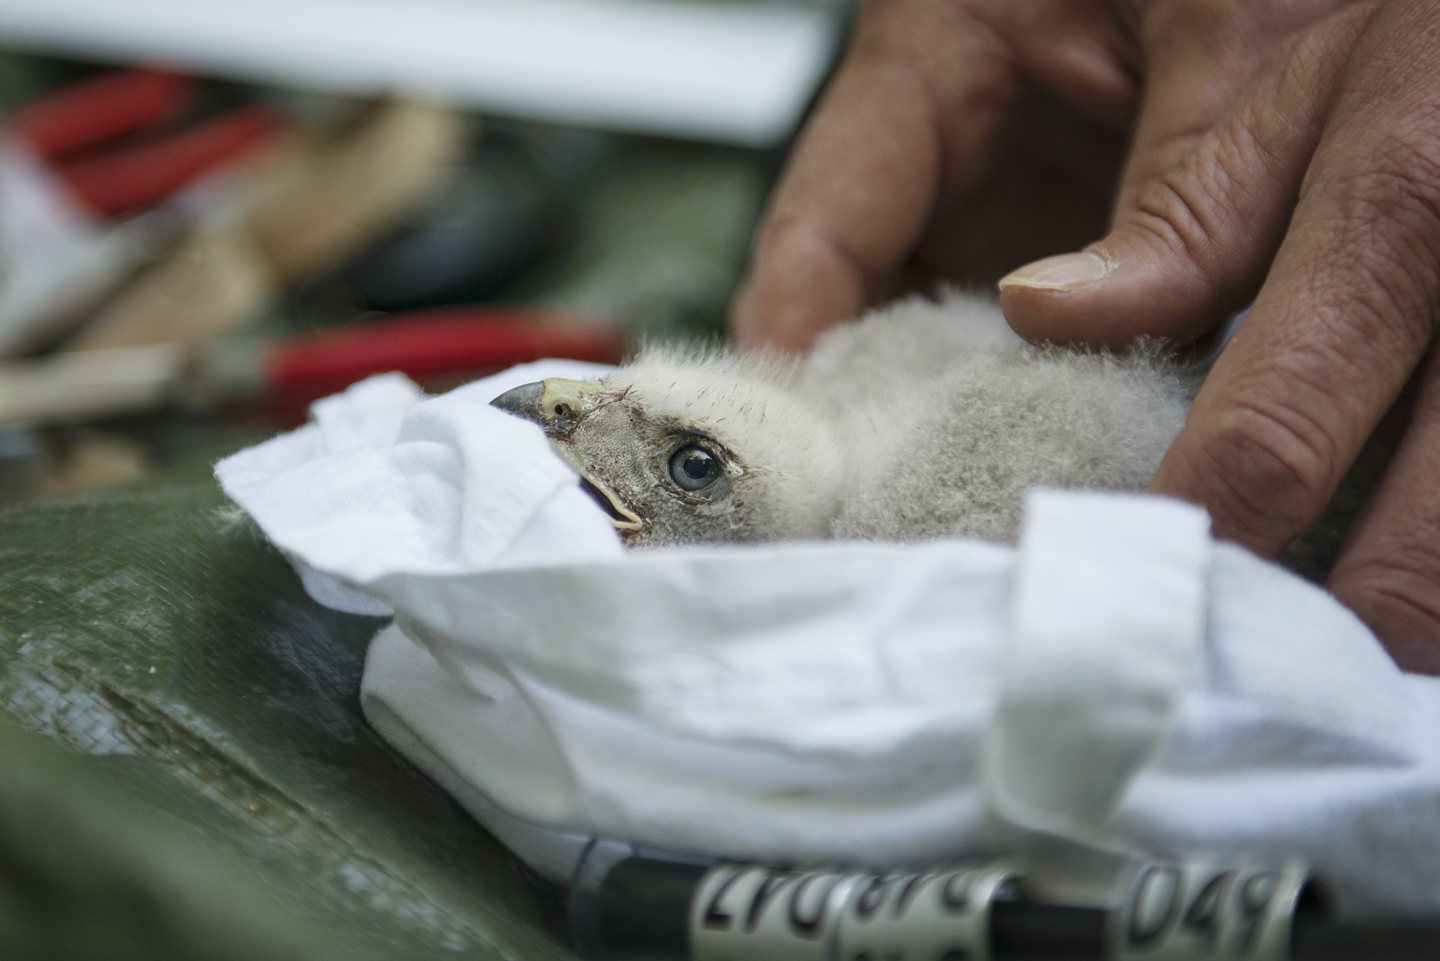  The nestlings are carefully placed in soft canvas bags and lowered to the ground 